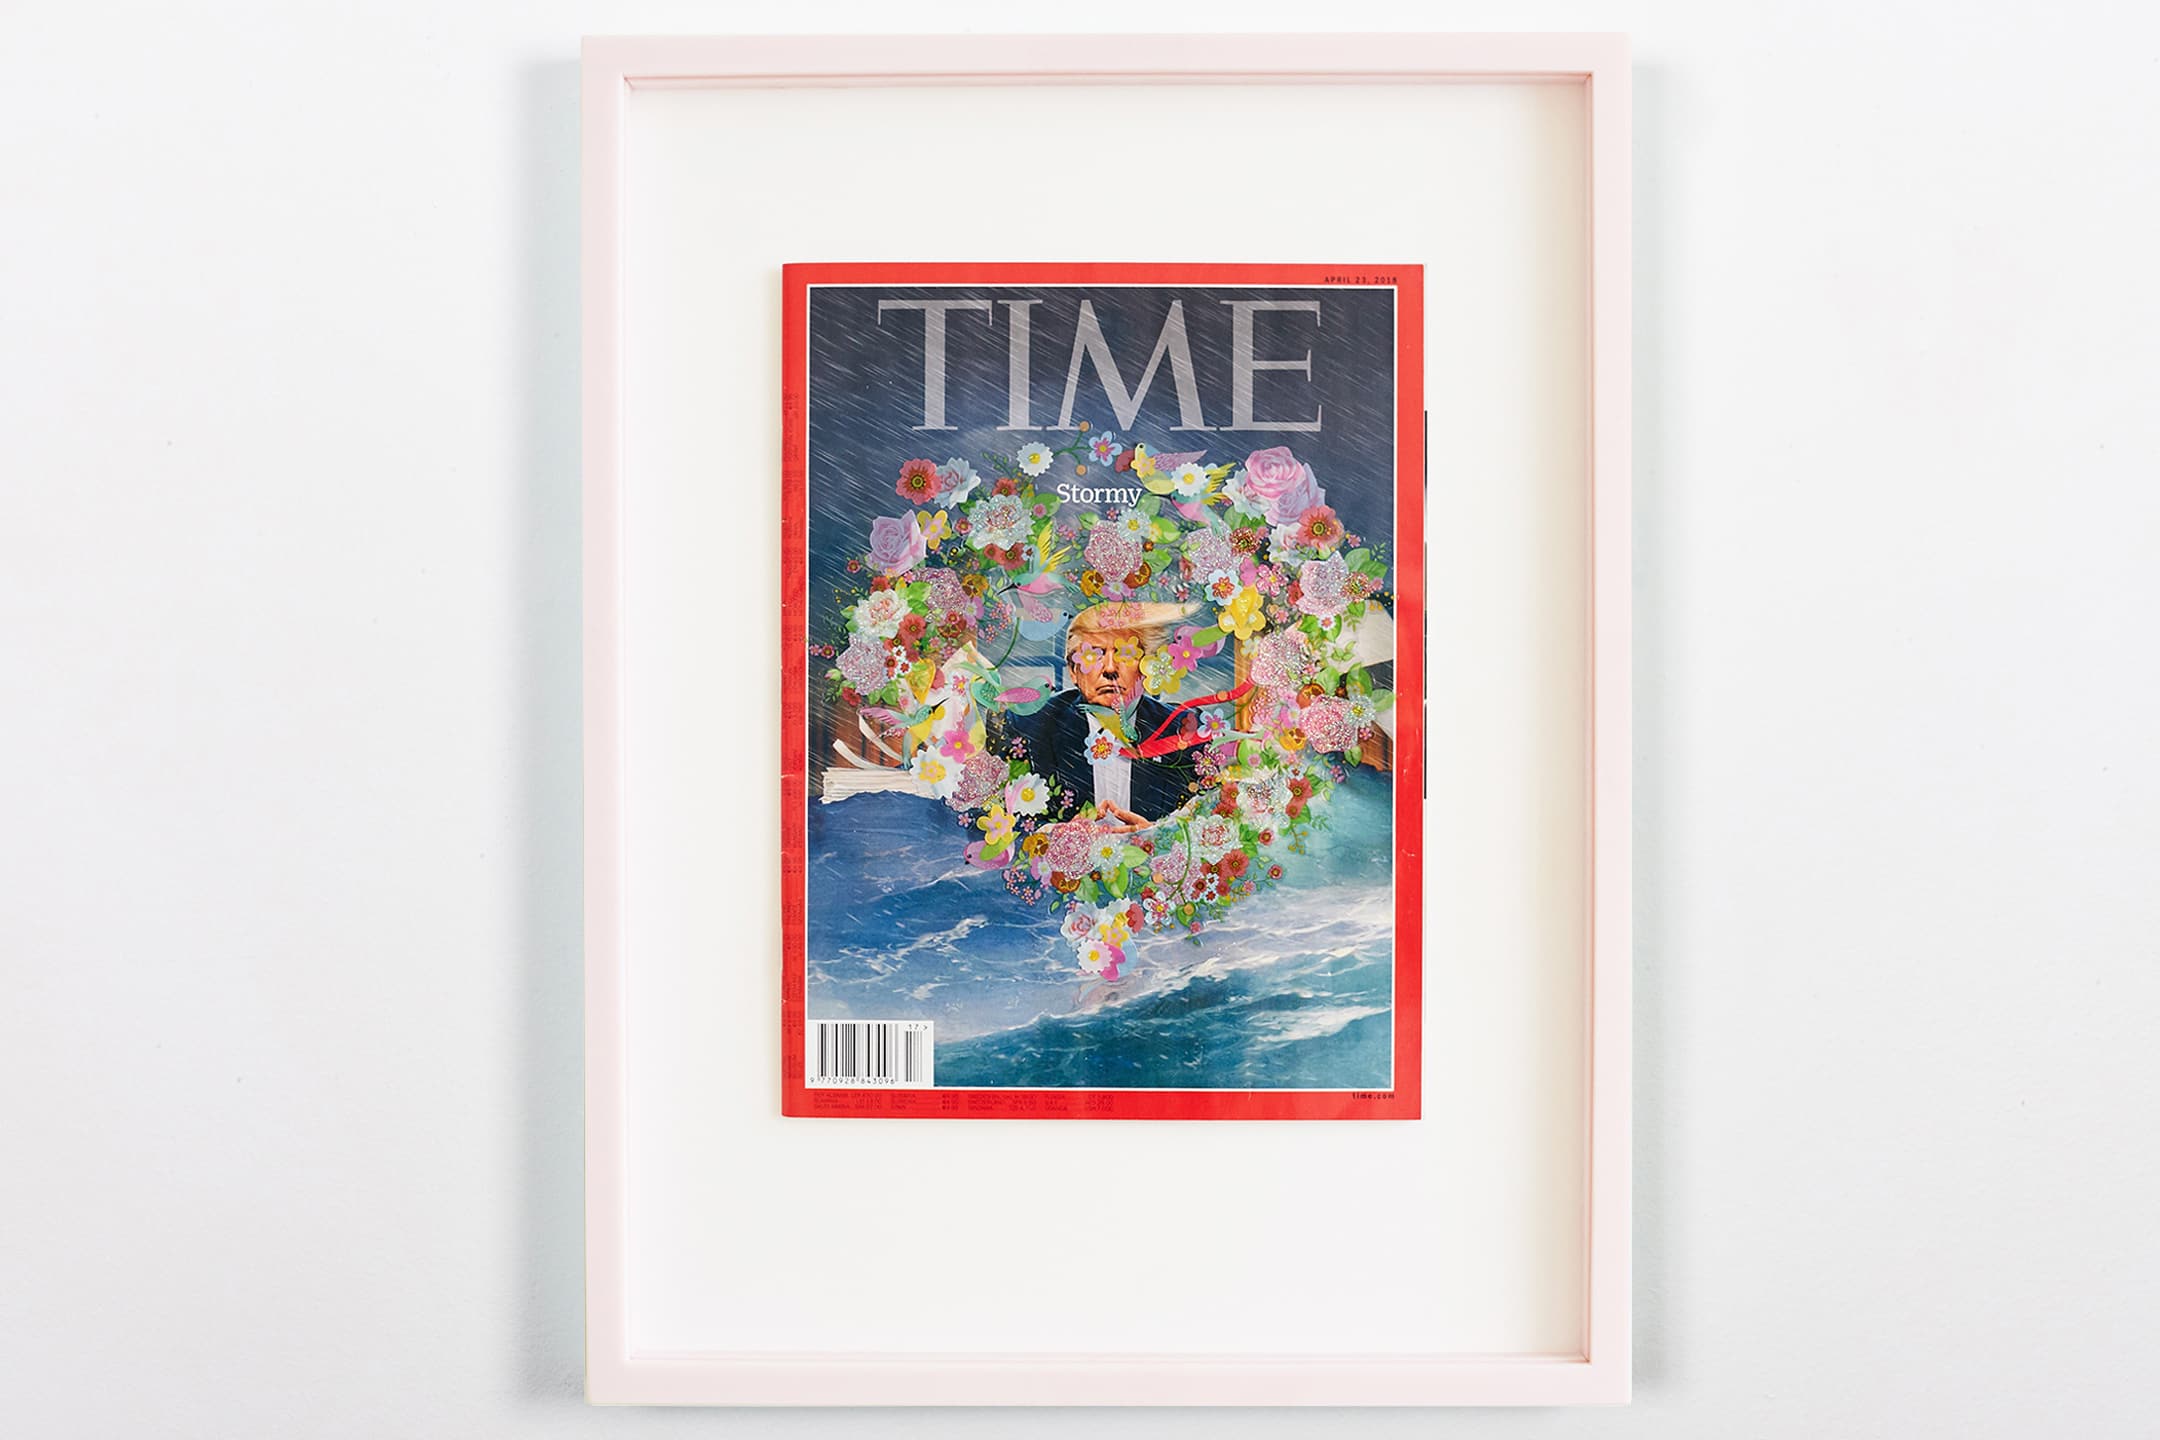 SOME-TIME 1816, 2018